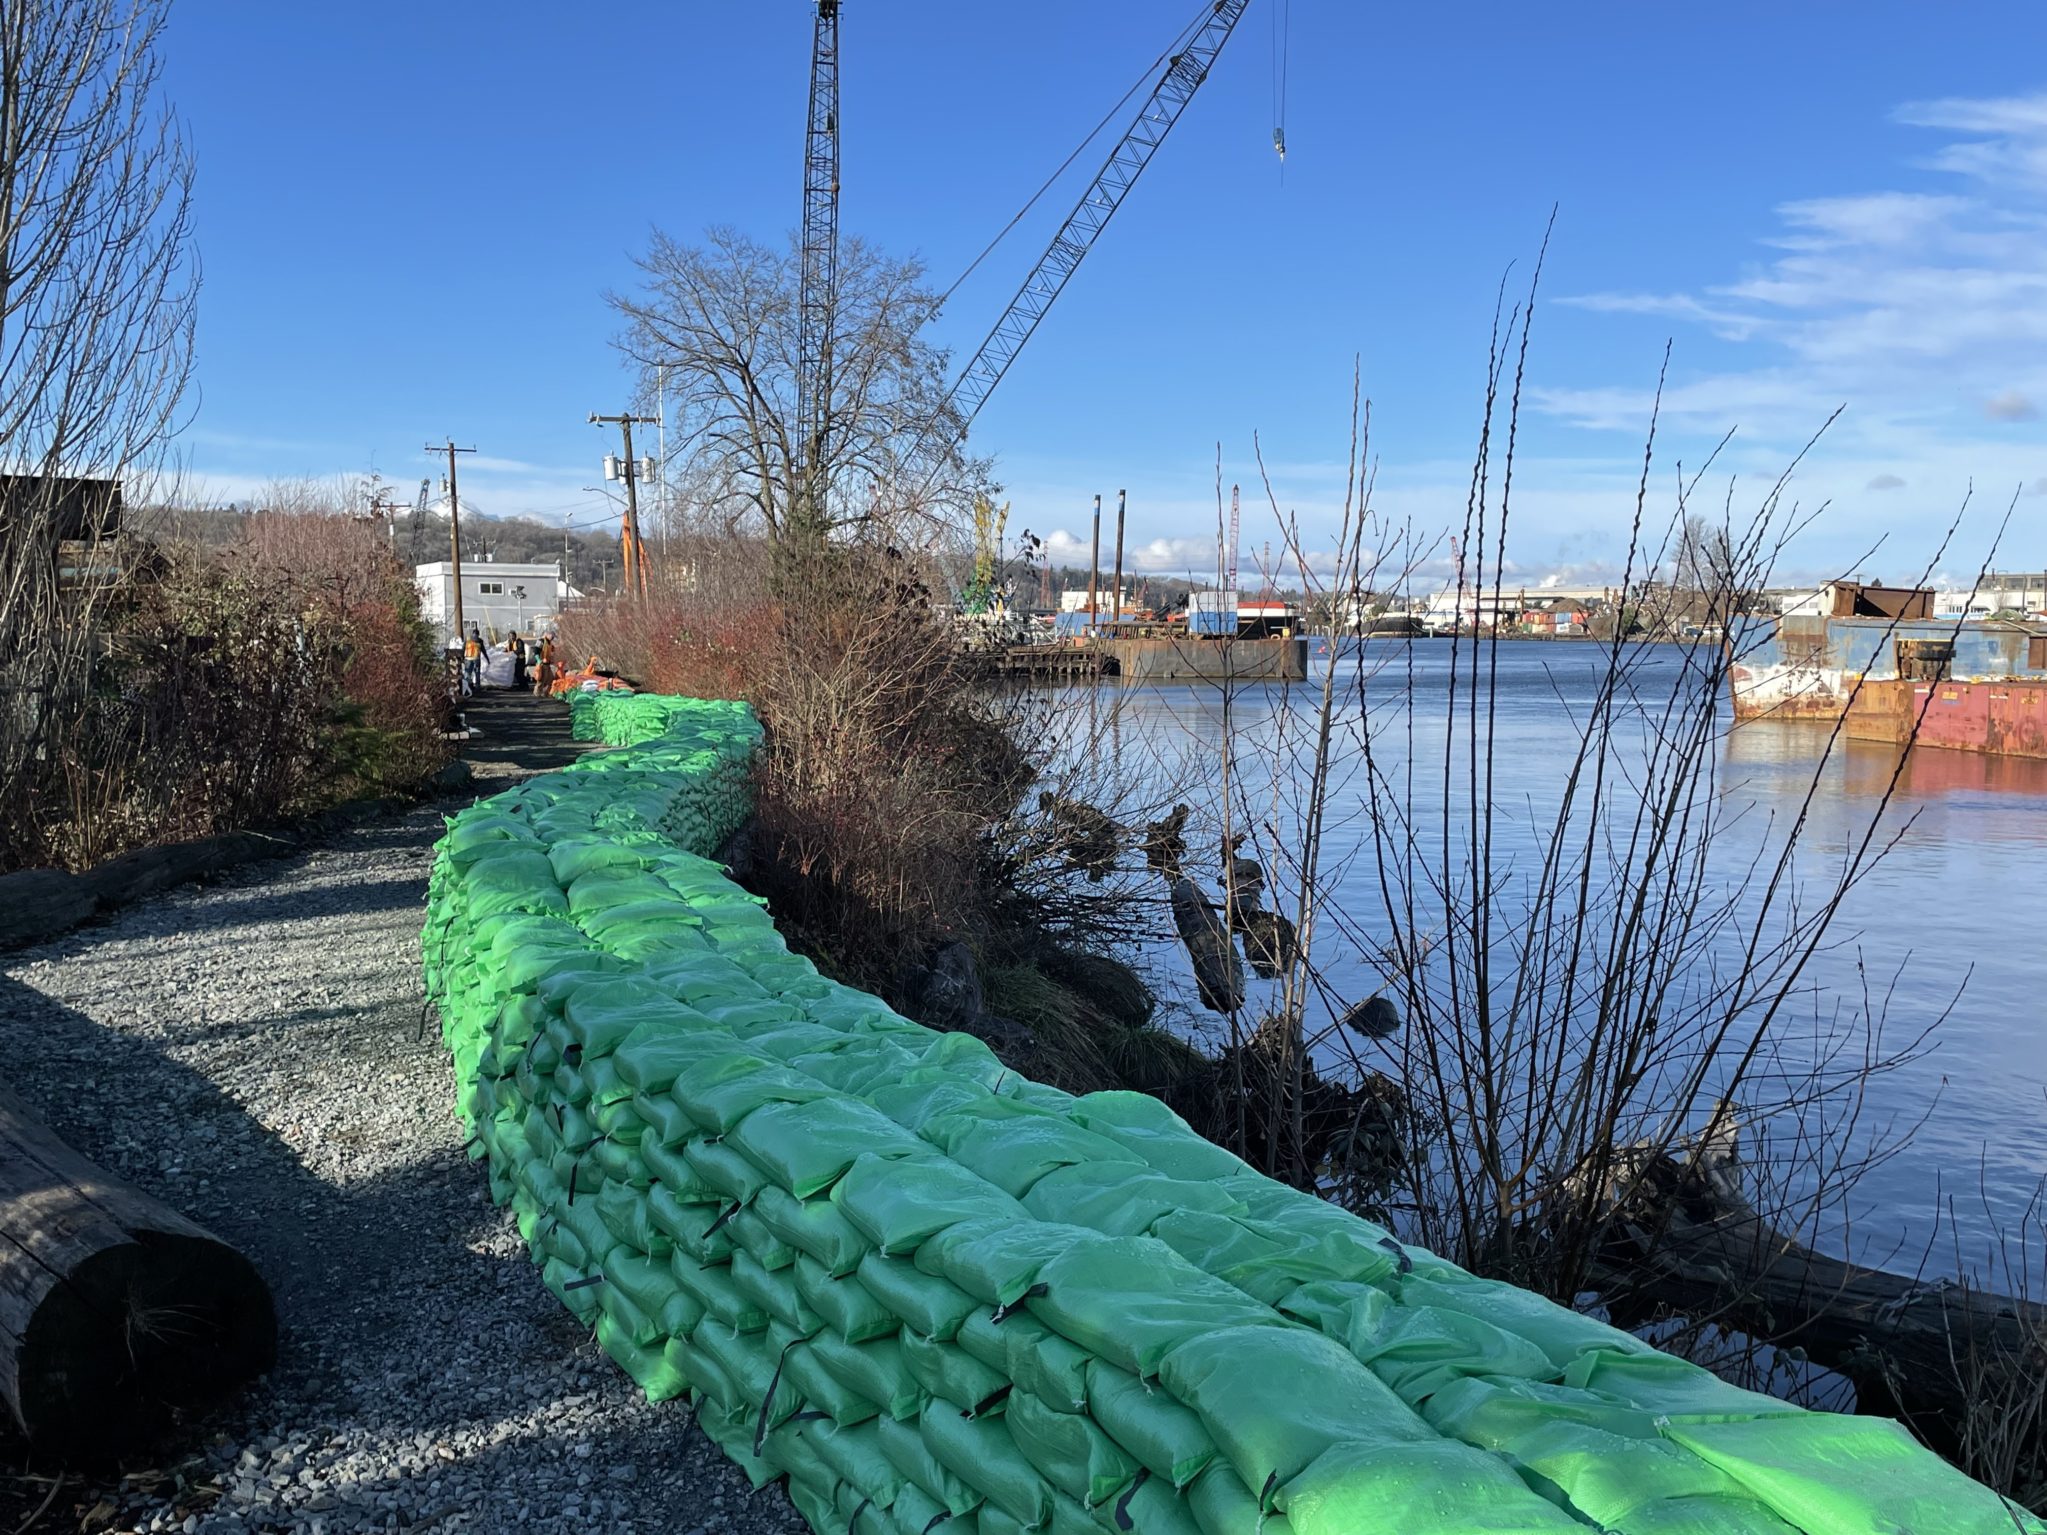 Photo shows a tall wall of sandbags along the river.